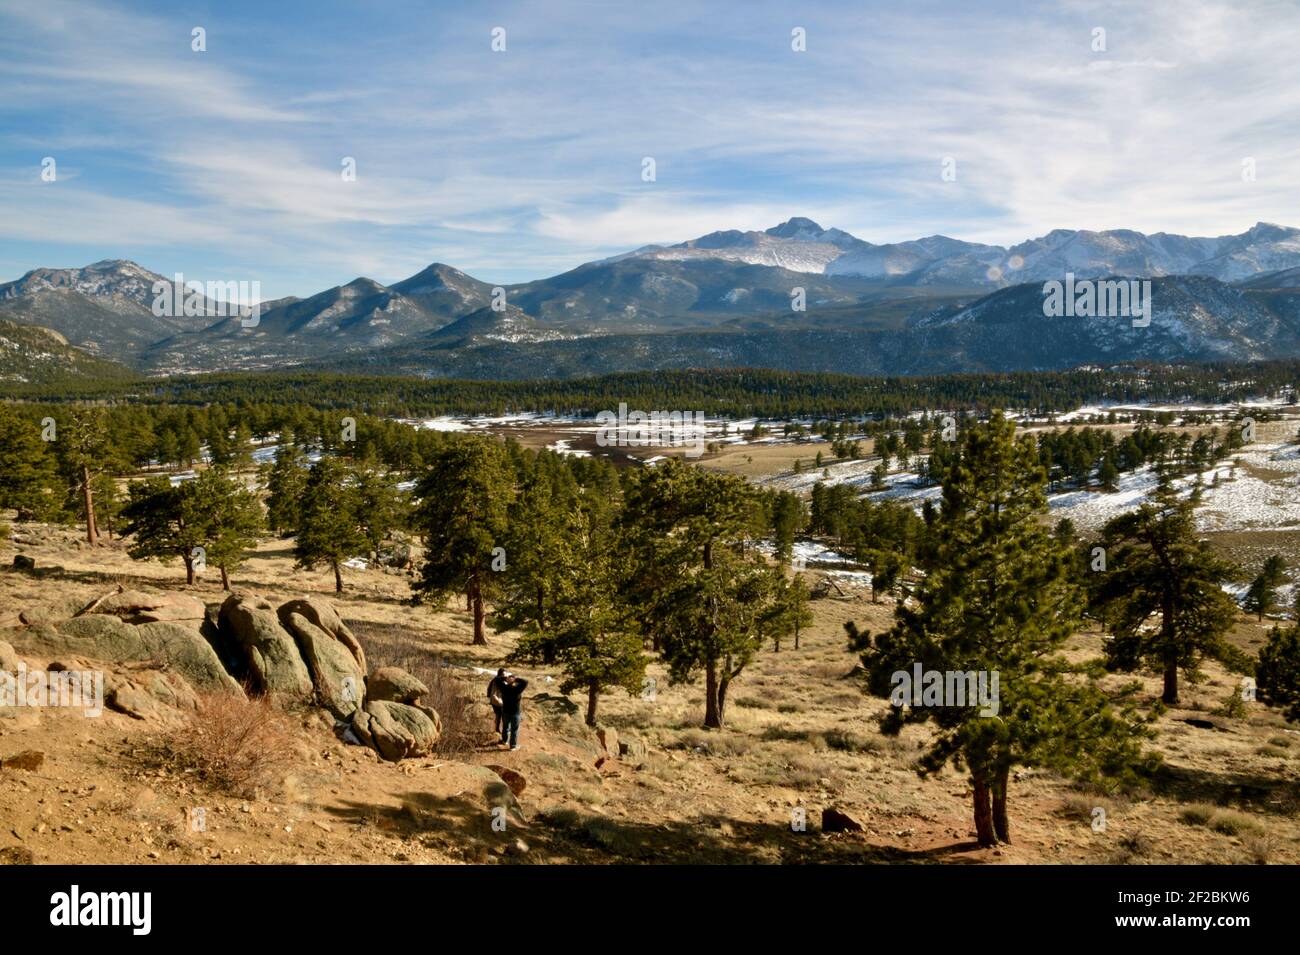 Rocky Mountains in the Rocky mountain National Park looking slightly Snow covered with dry grasslands in the foreground with pine trees. Stock Photo